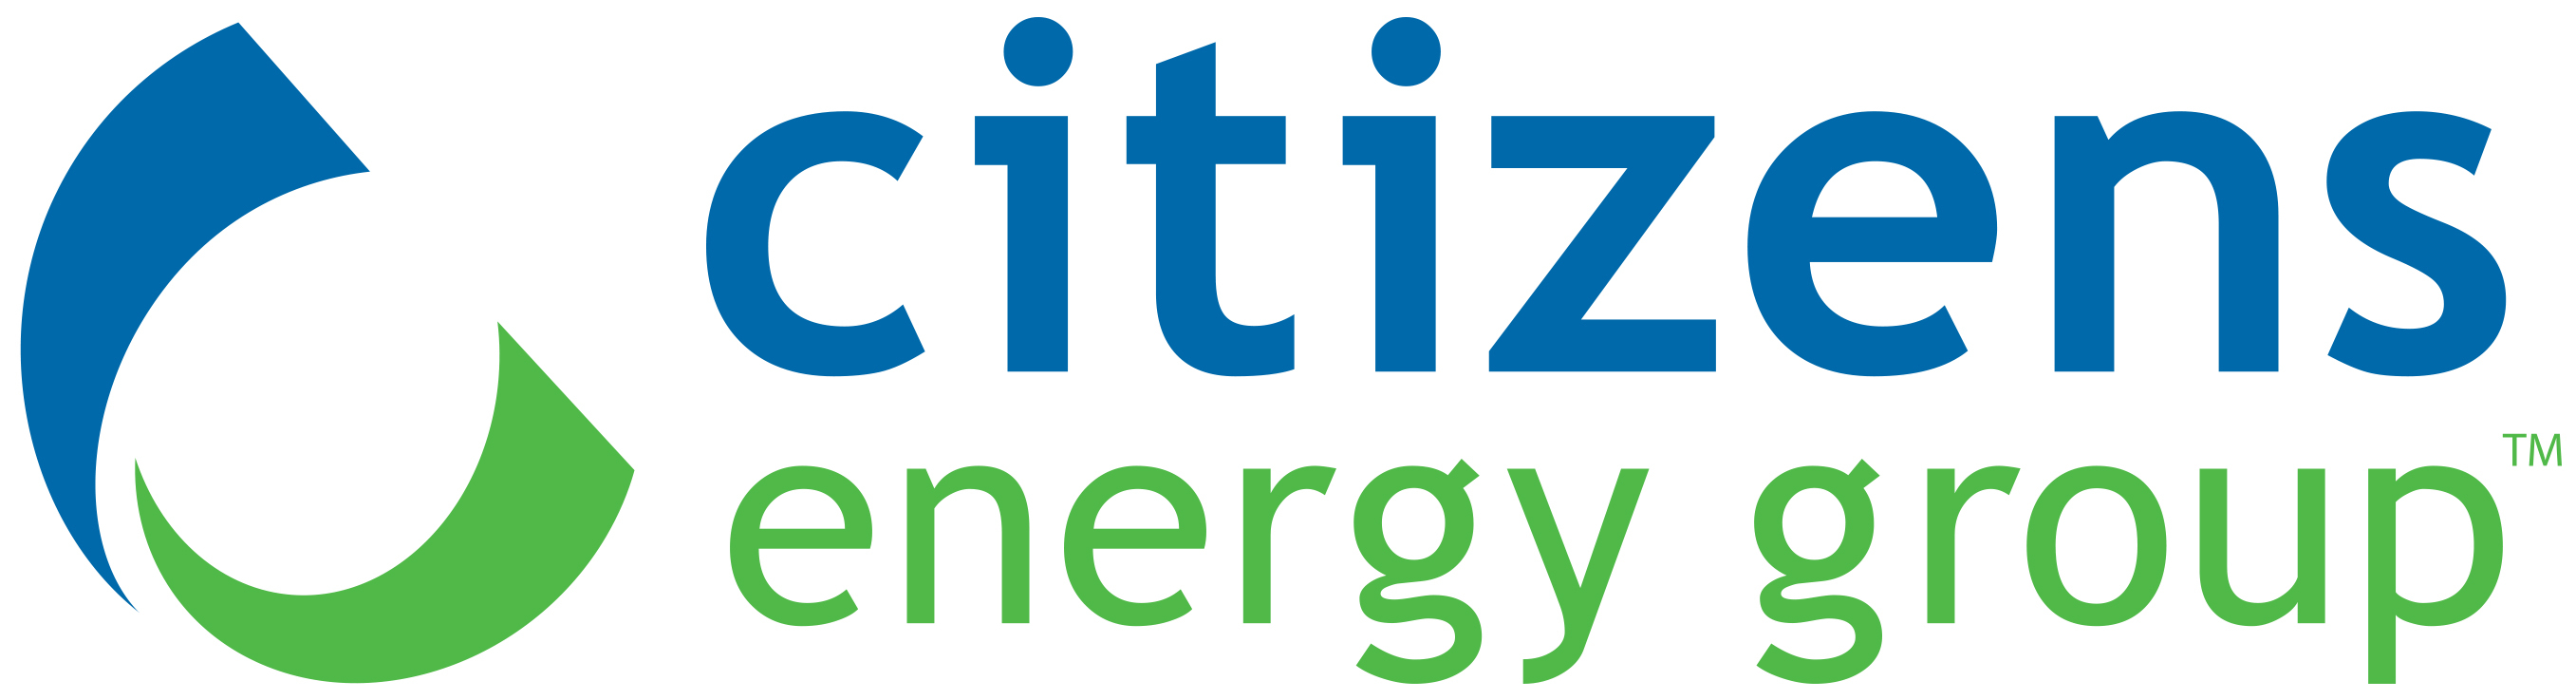 Citizens Energy Group logo (opens in new window)